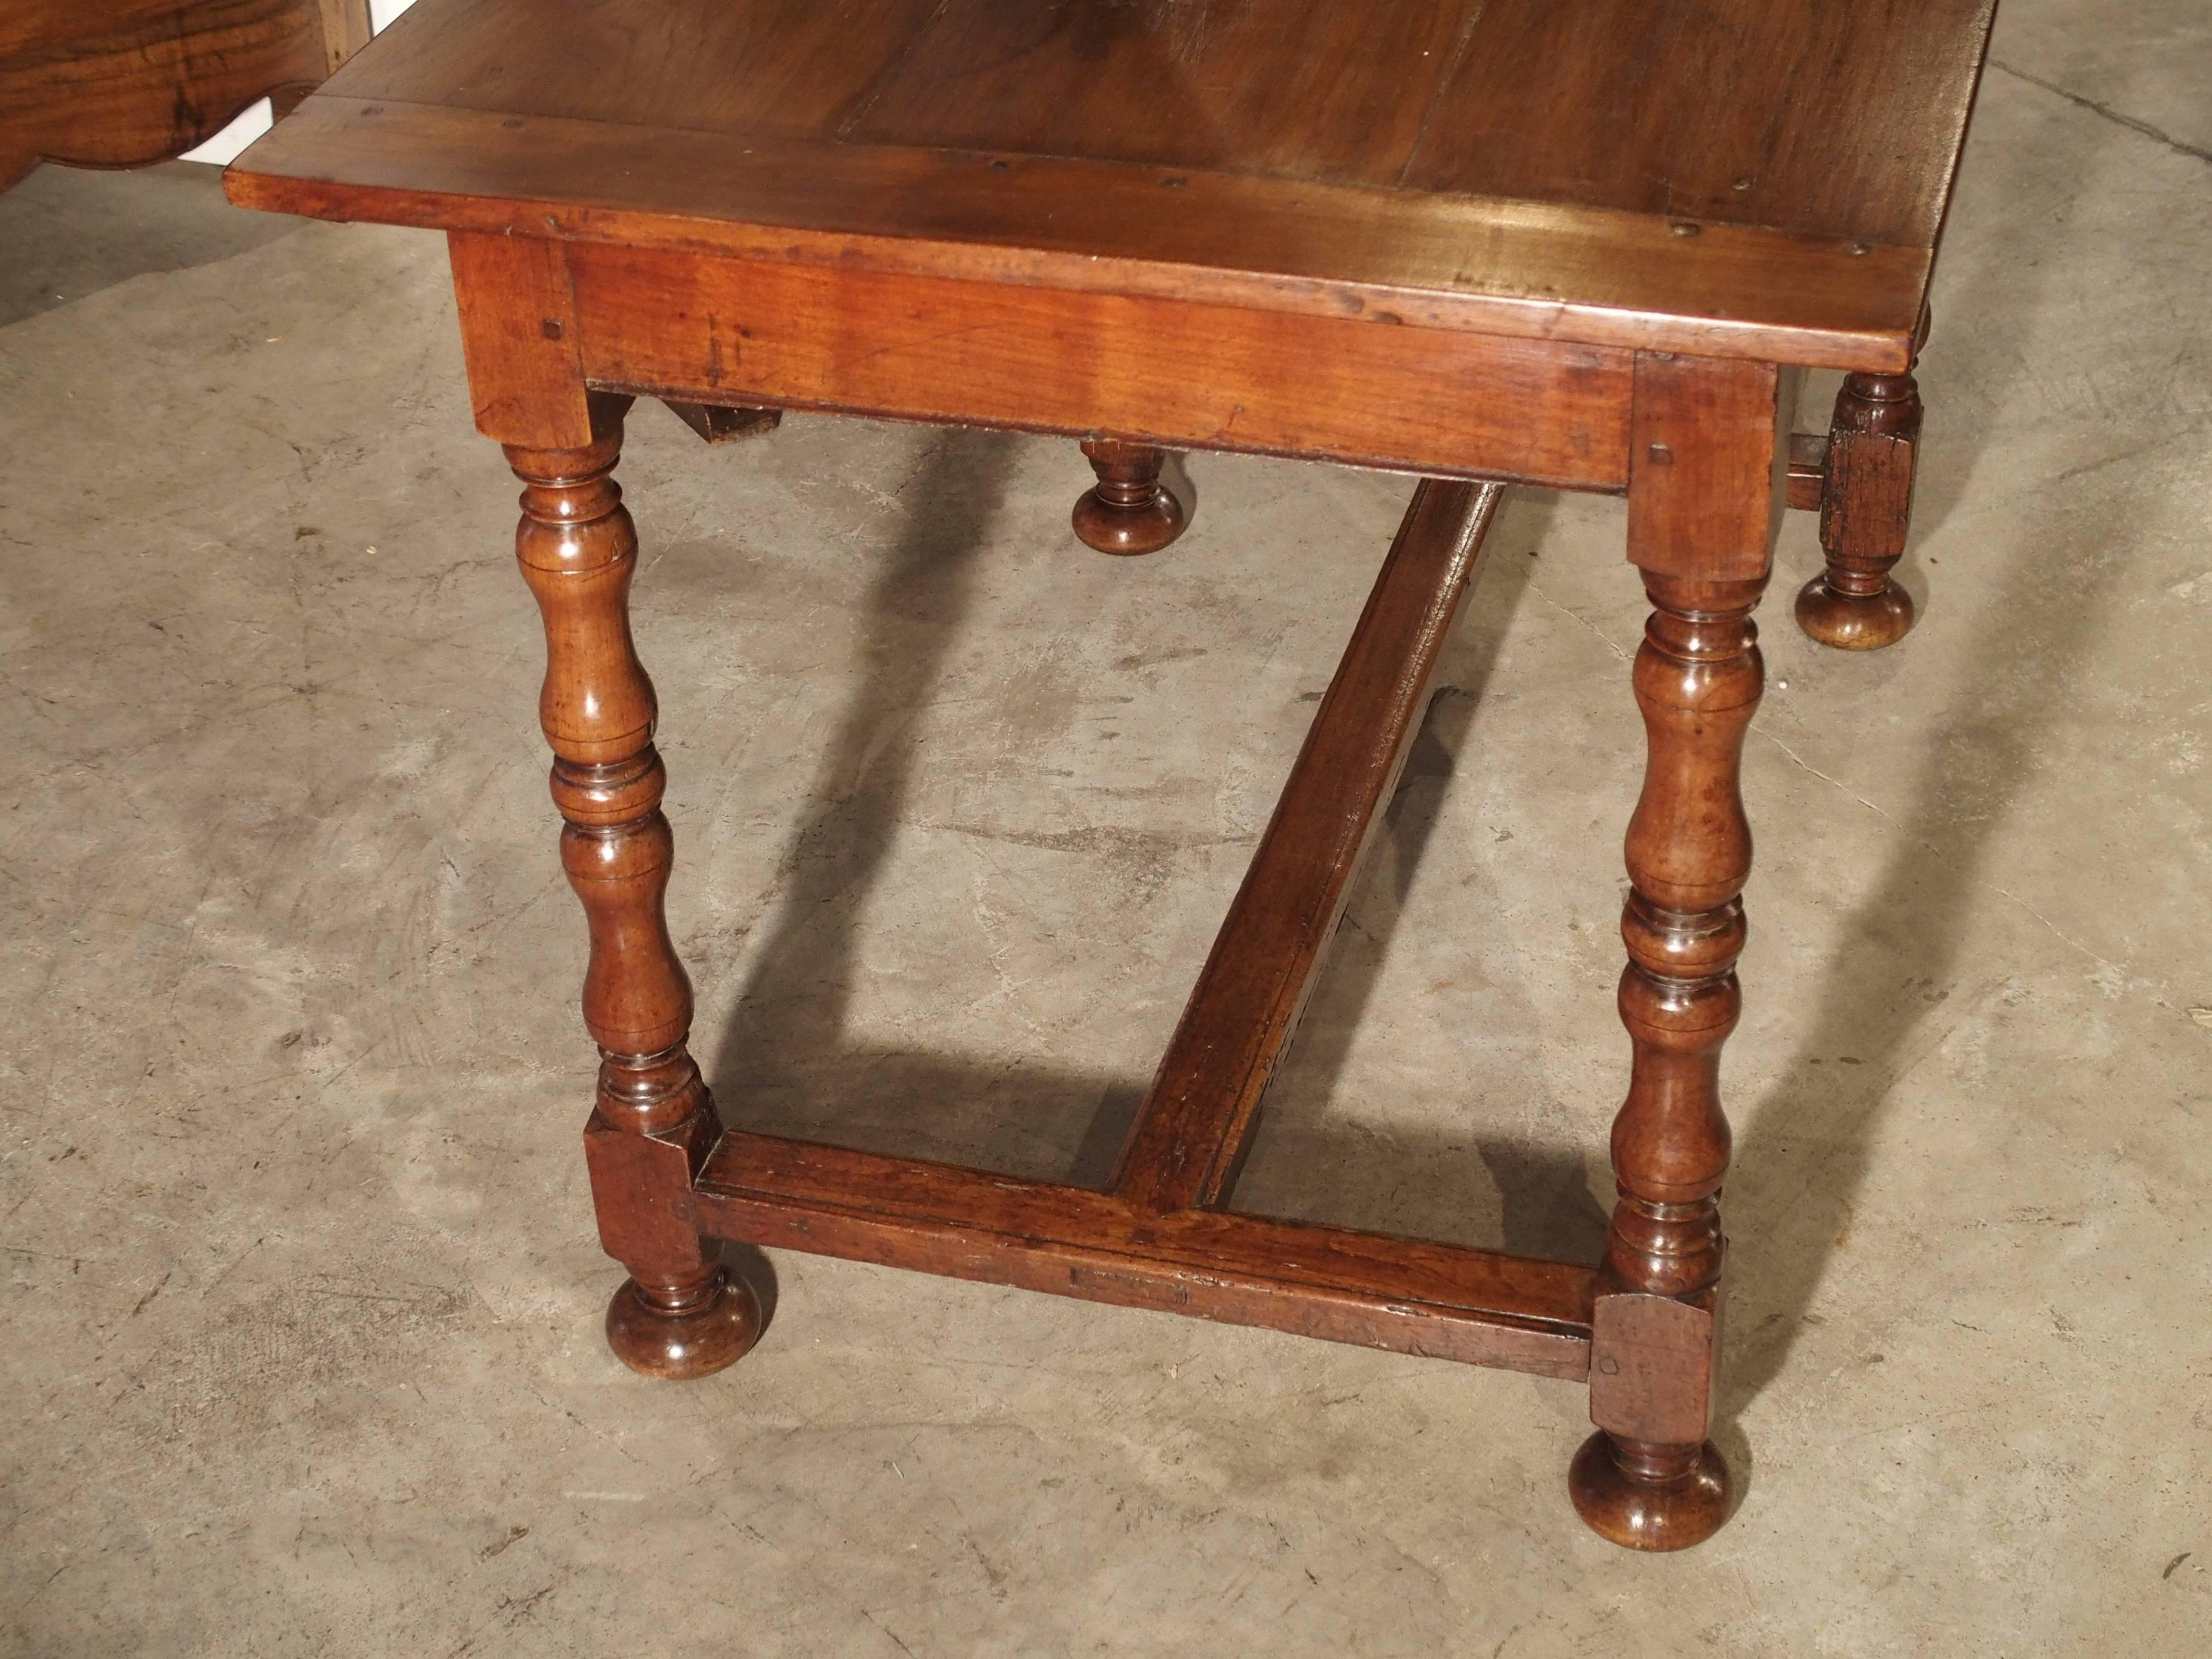 Hand-Carved Antique Cherry and Walnut Wood Side Table, 18th Century